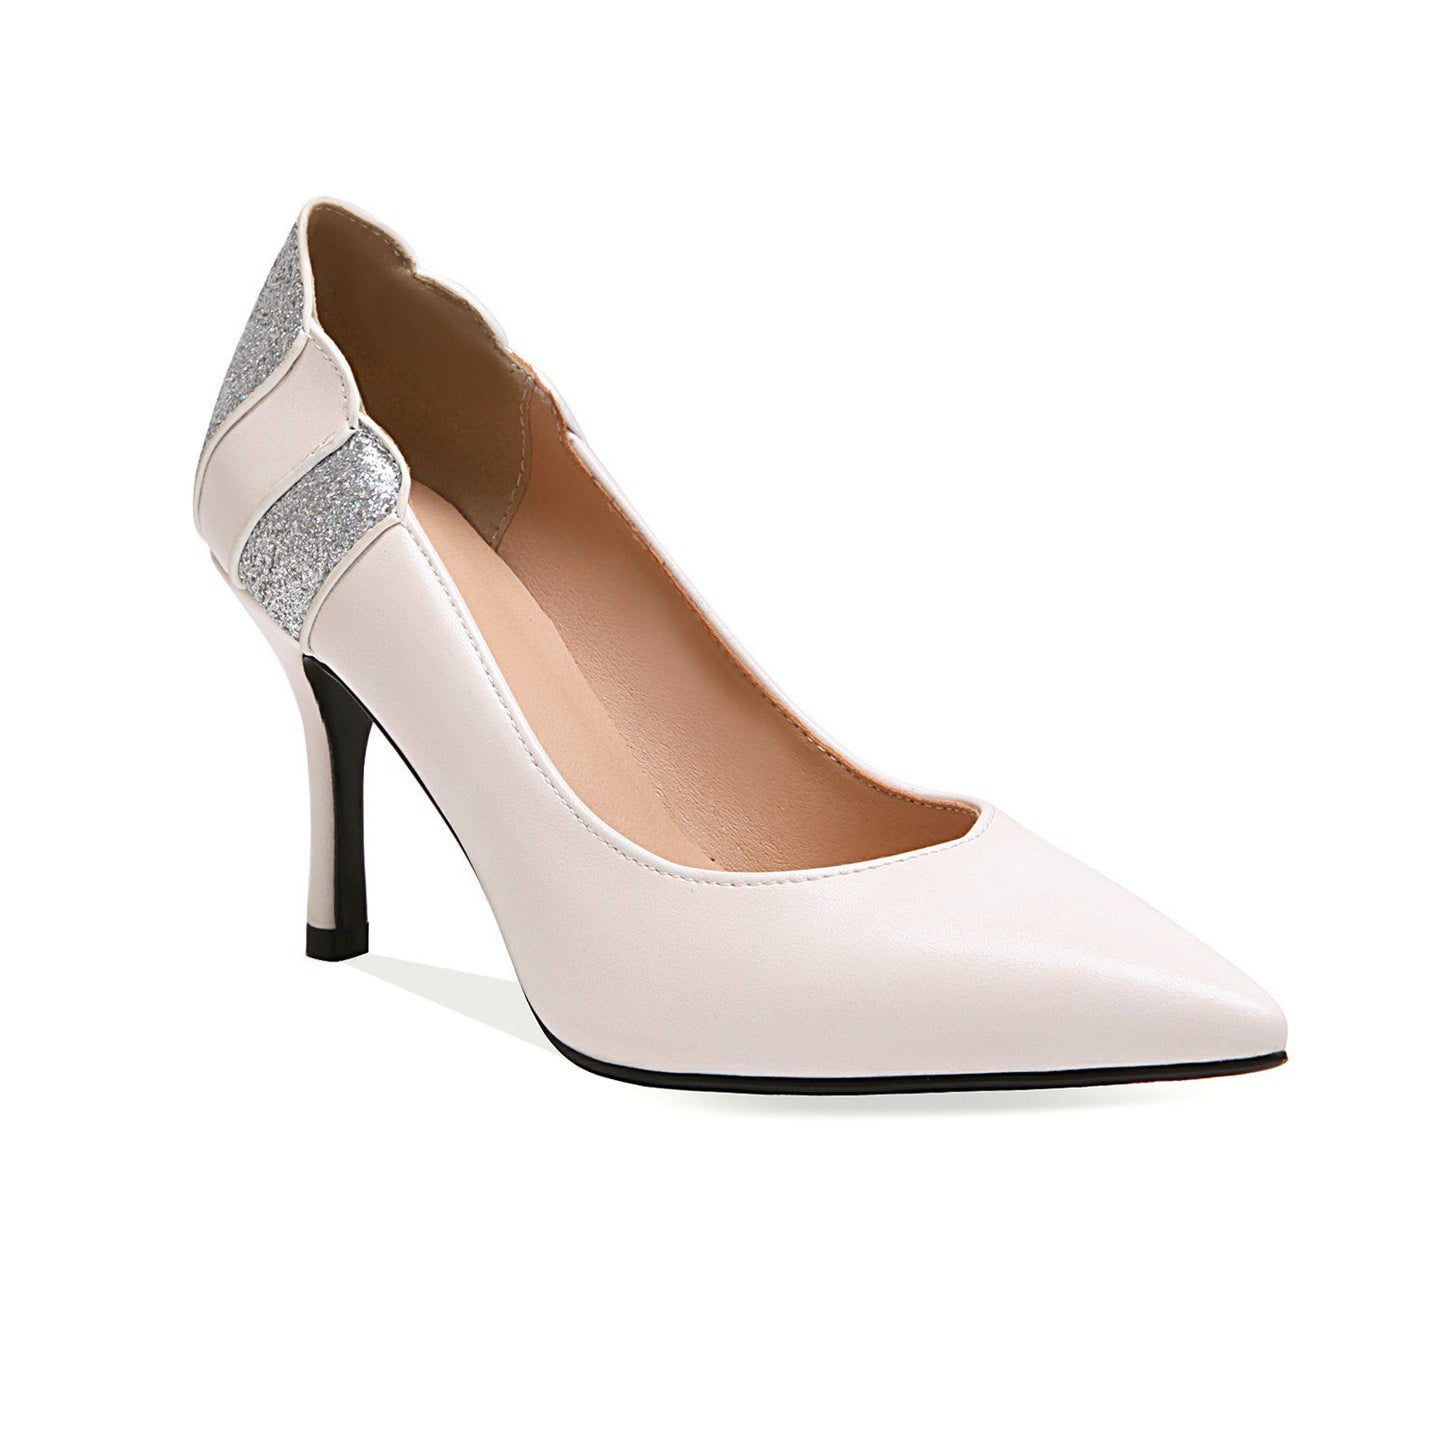 Lady Woman's Shoes High-heeled Shallow Super-fibre Pointed Toe Pumps